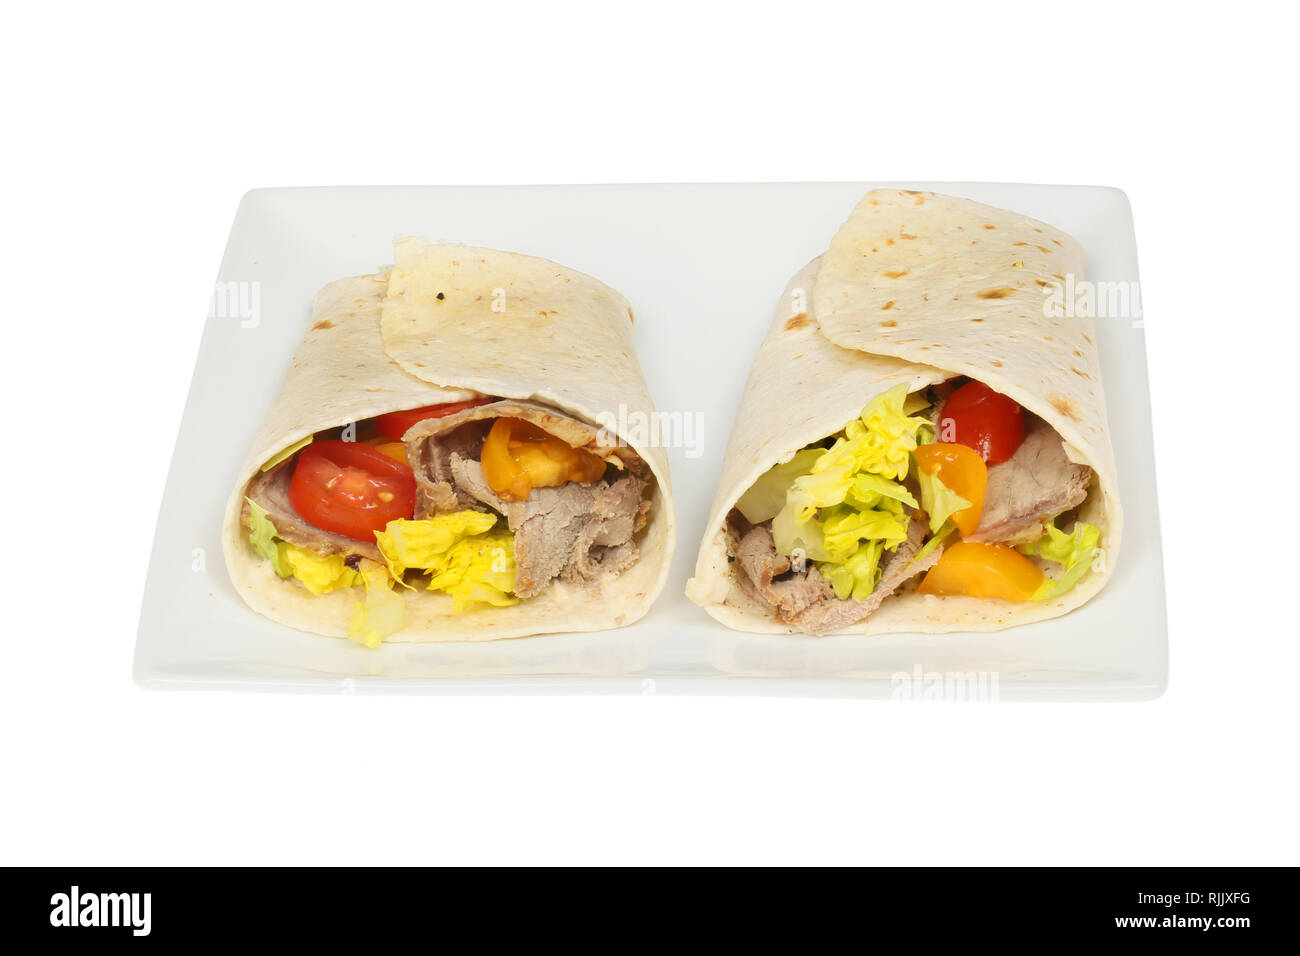 Beef, tomato and lettuce sandwich wraps on a plate isolated against white Stock Photo